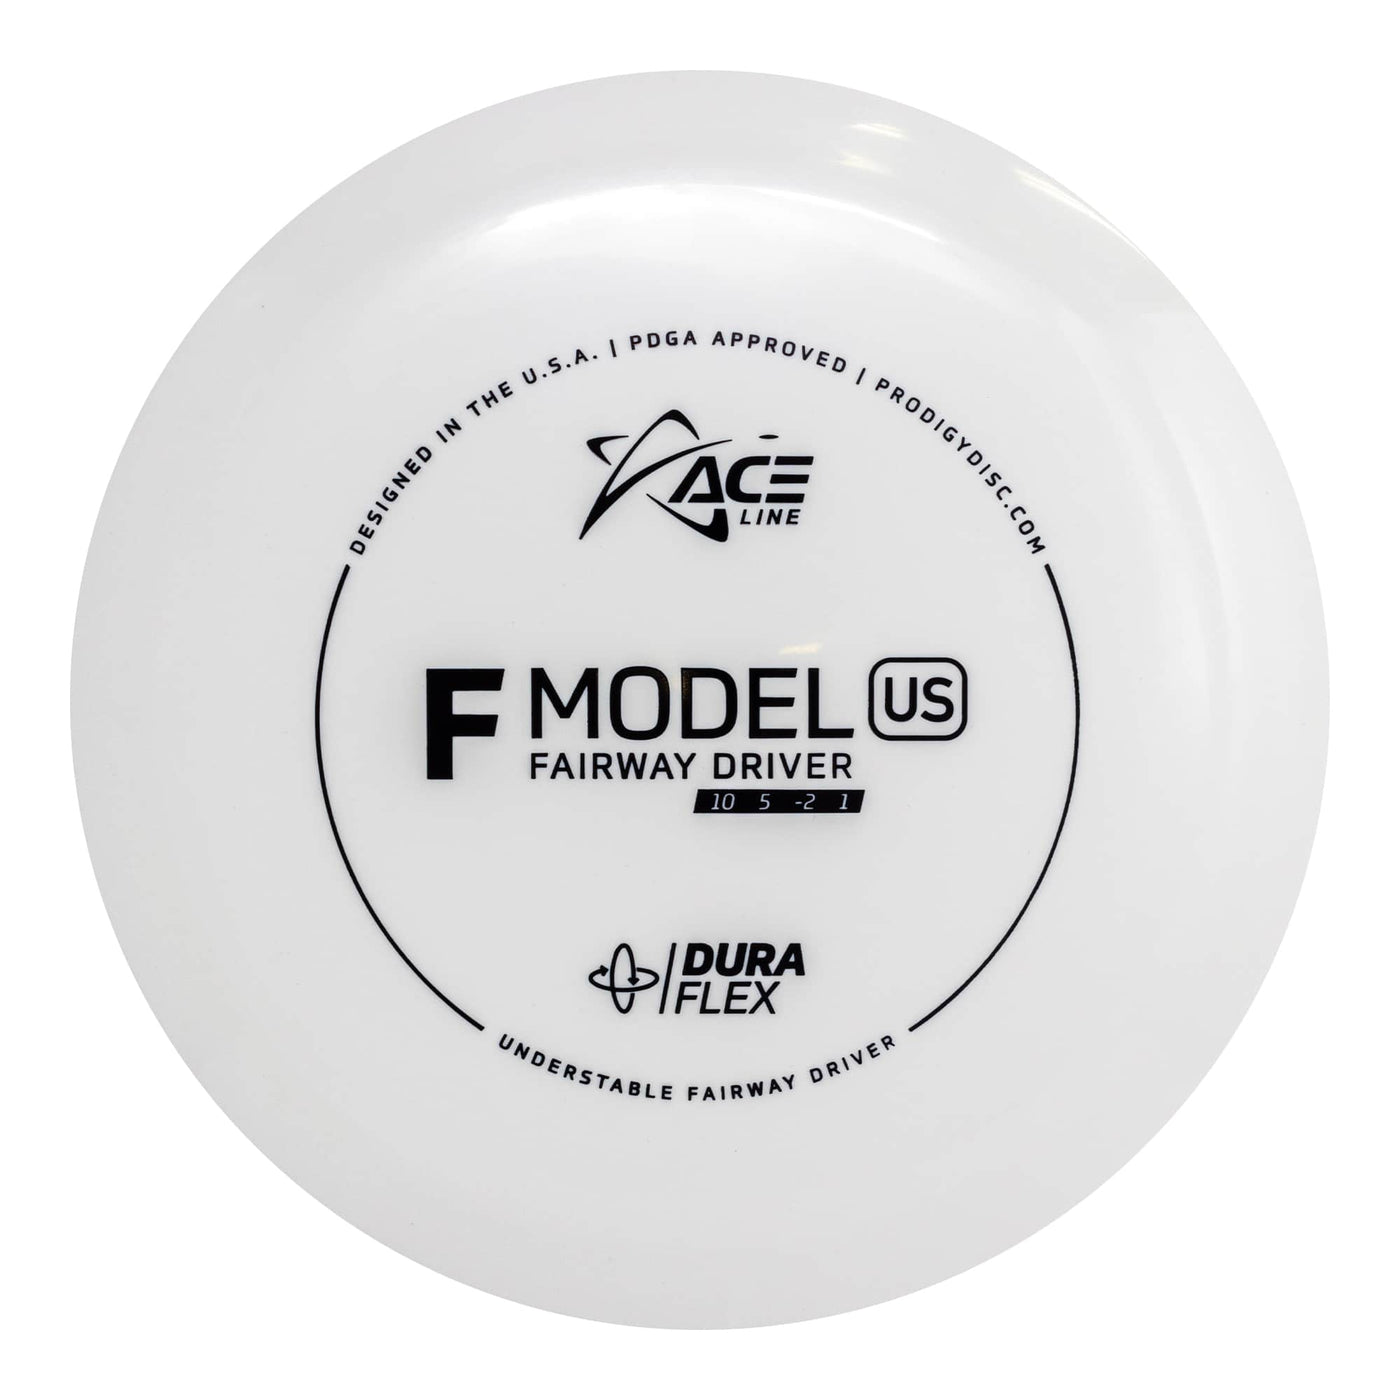 Prodigy Ace Line F Model US Fairway Driver